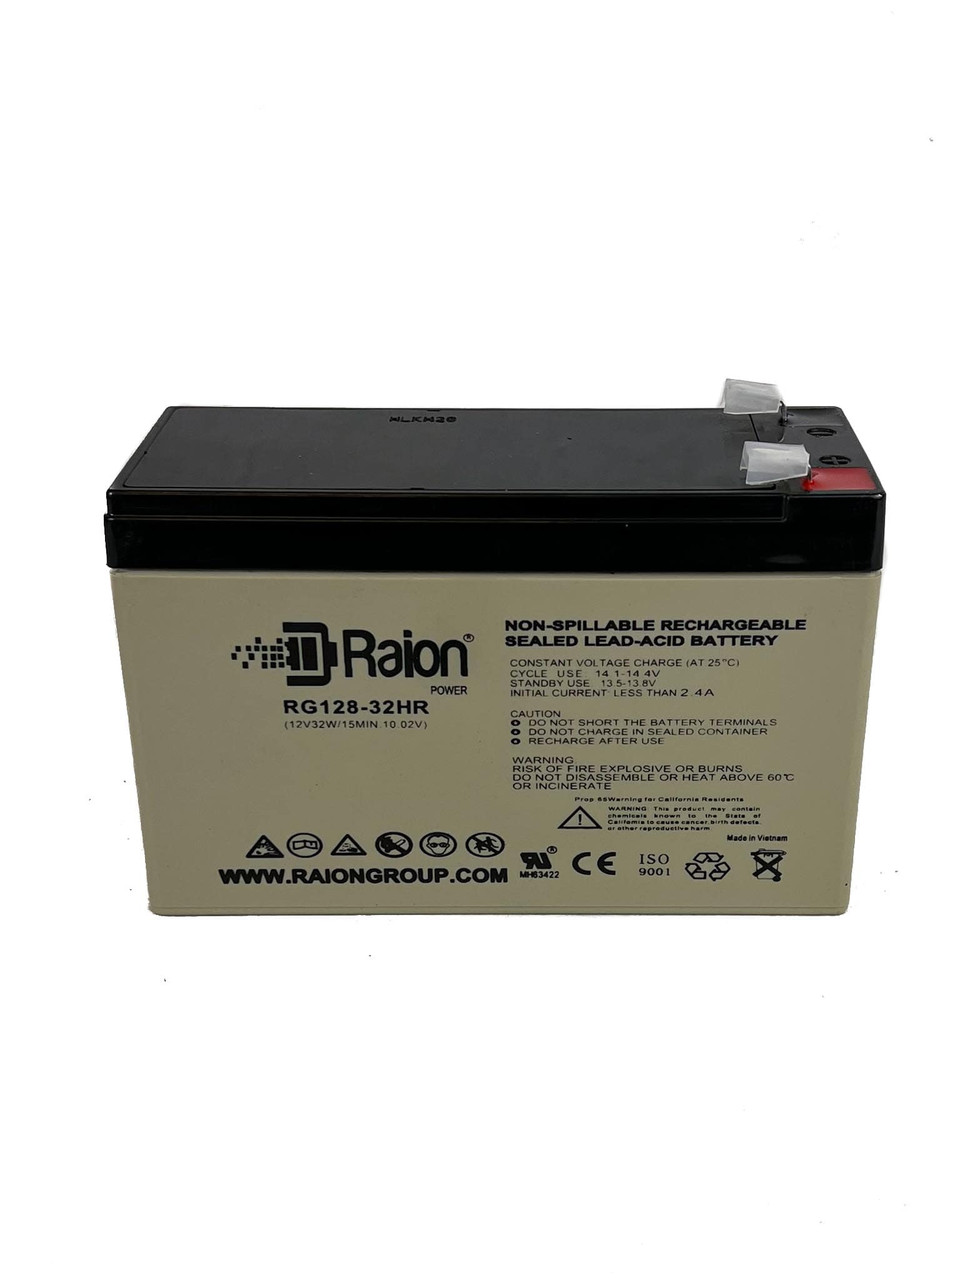 Raion Power RG128-32HR Replacement High Rate Battery Cartridge for APC Back-UPS 500VA 230V BK500MICW